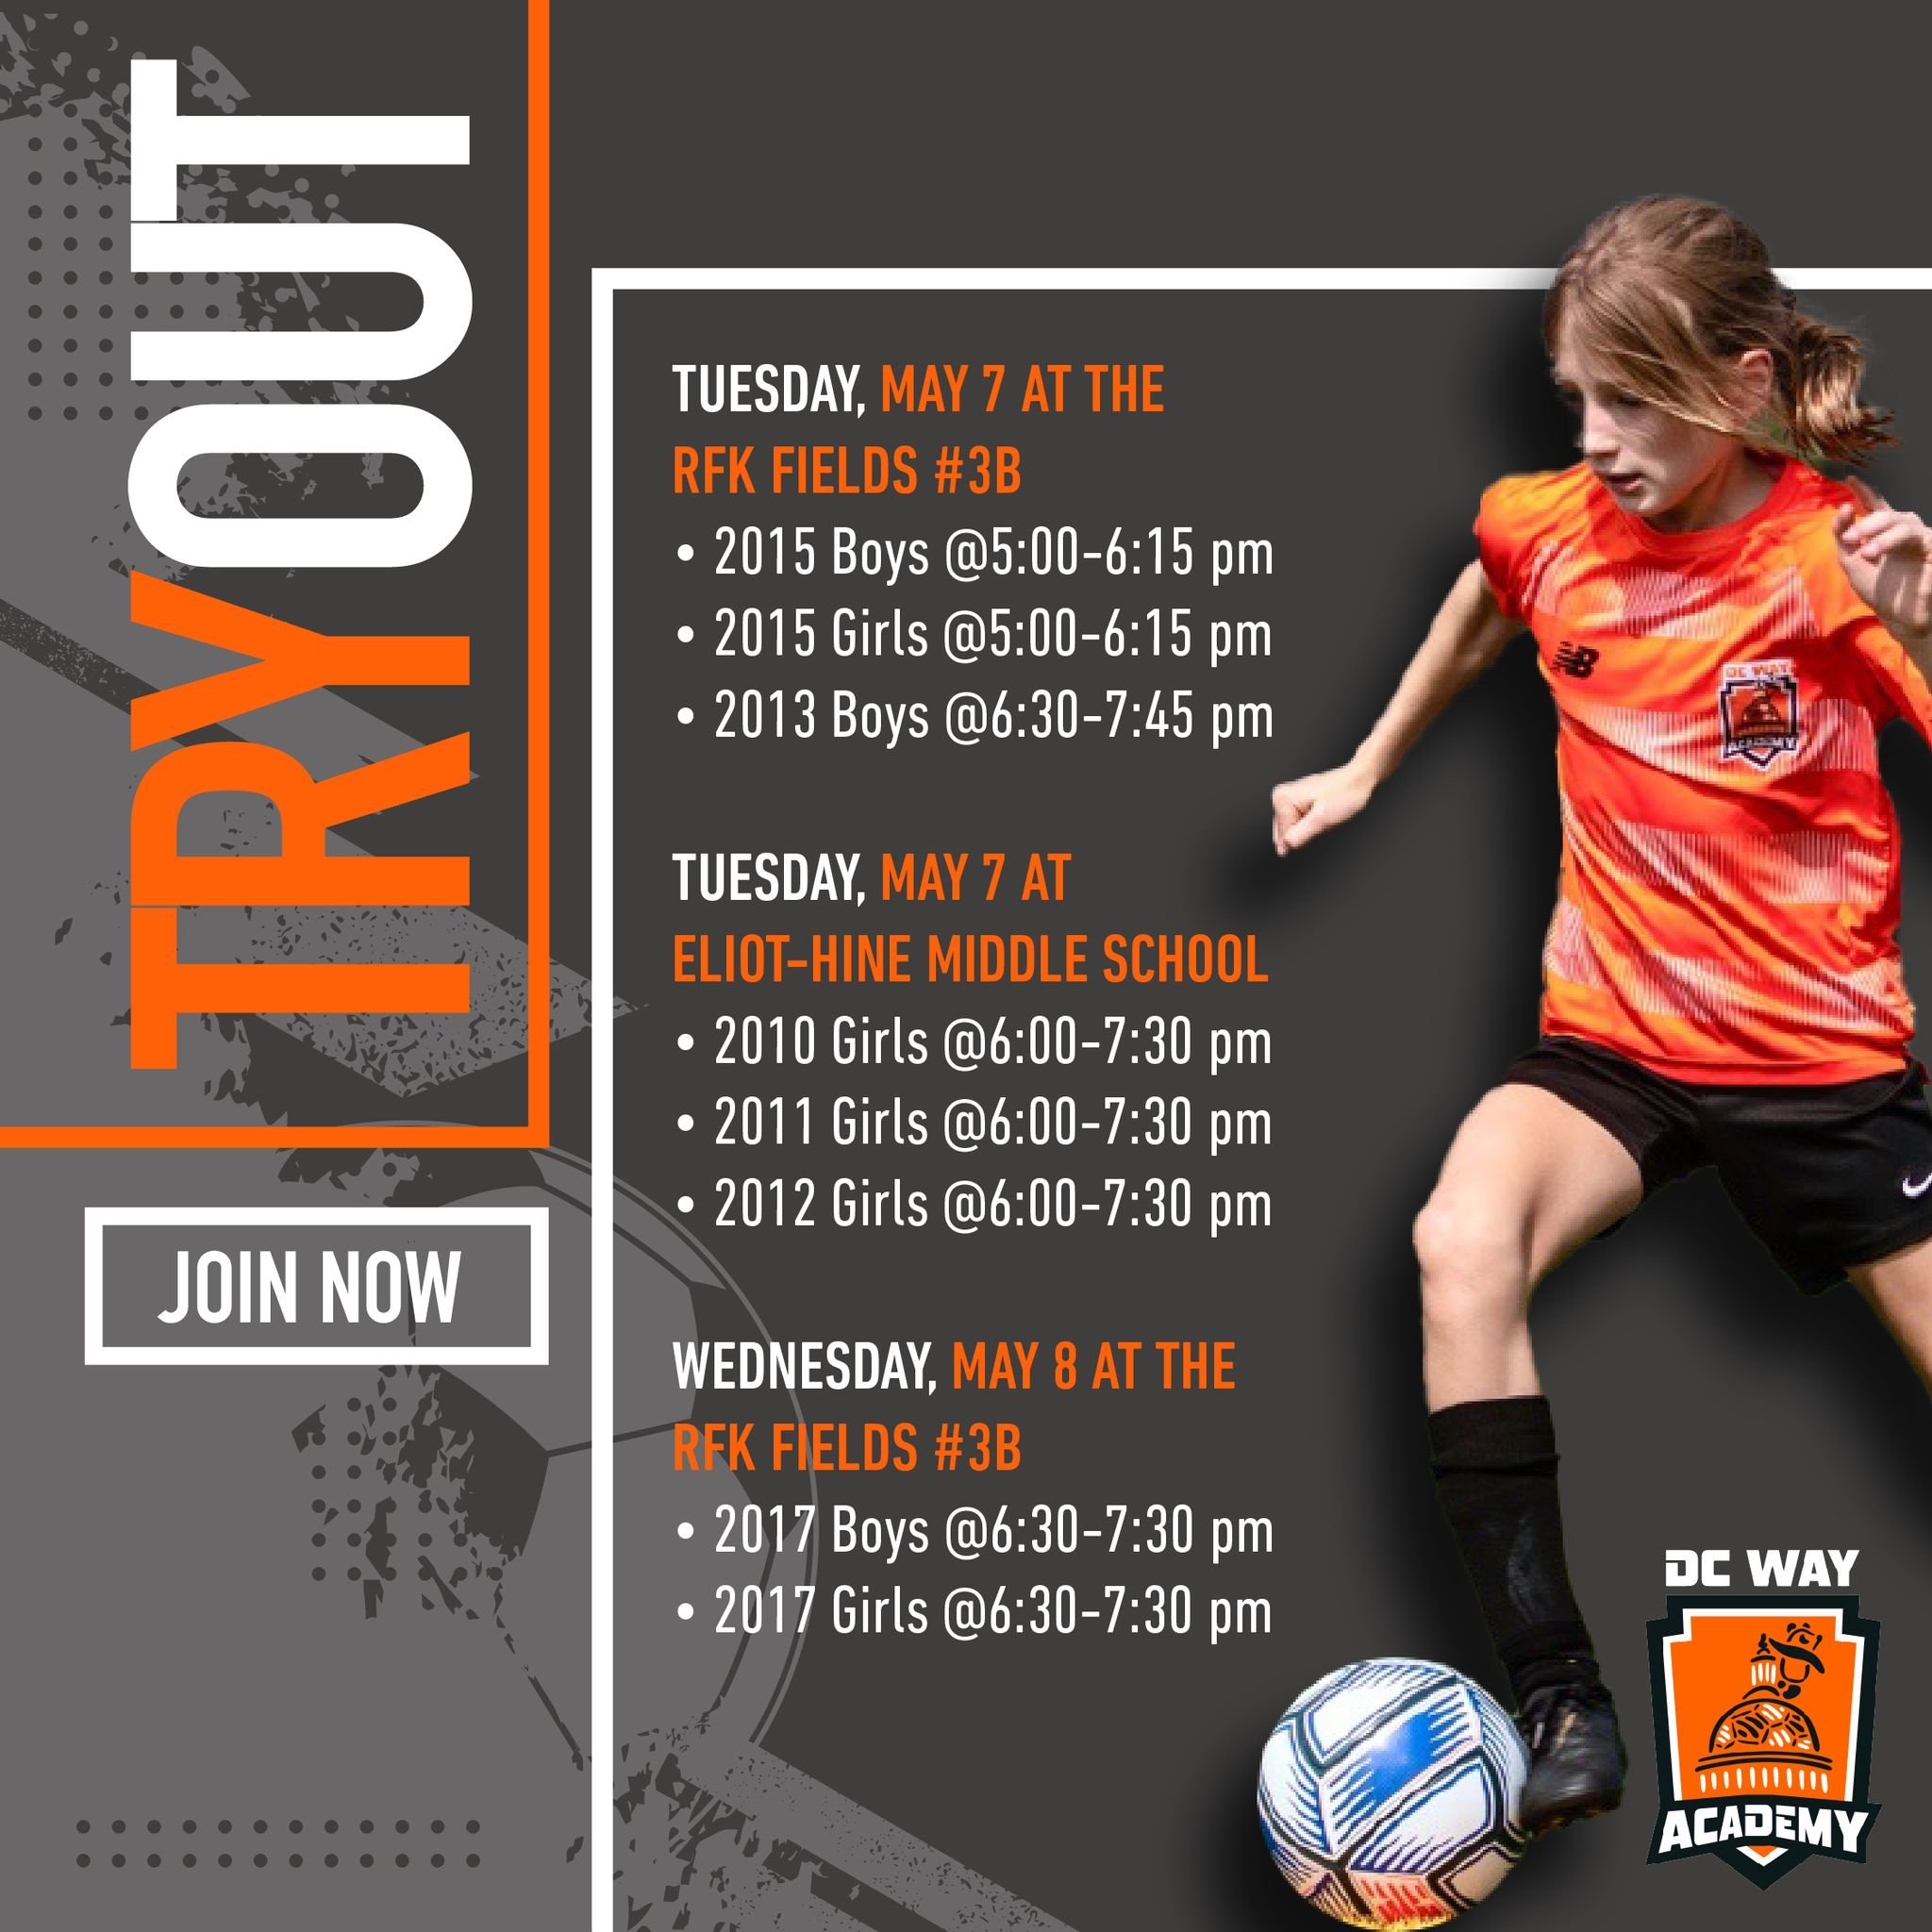 Save the Dates for our tryouts! ⚽️ This is your chance to shine! ✨
 
🗓️ Tuesday, May 7 at the RFK Fields - #3B
2015 Boys &amp; Girls: 5:00-6:15 pm
2013 Boys: 6:30-7:45 pm
 
🗓️ Tuesday, May 7 at Eliot-Hine Middle School
2010, 2011, 2012 Girls: 6:00-